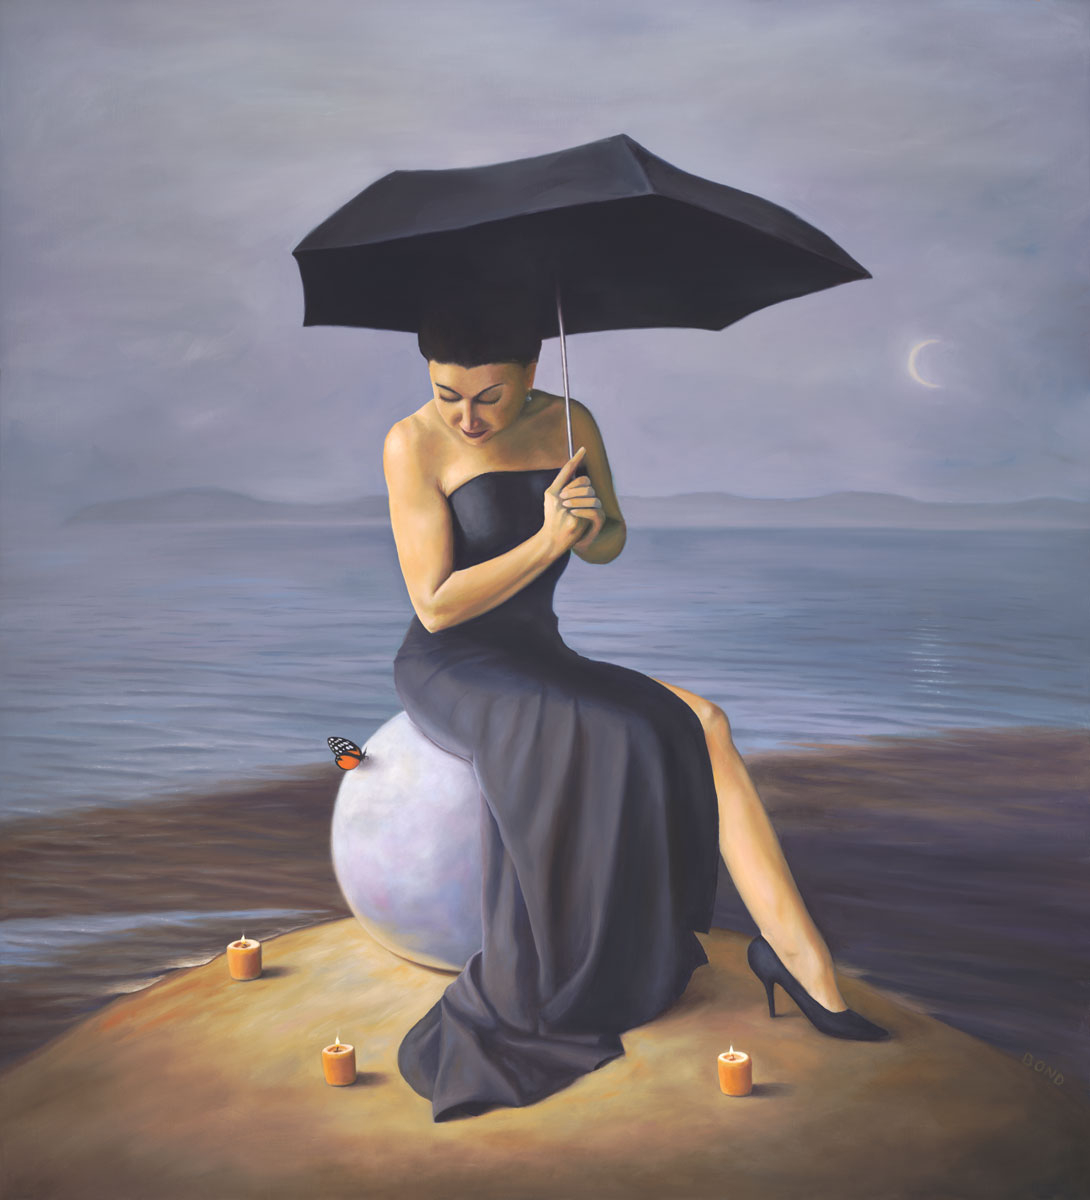 The Luminous Pearl of Her Appointed Plenitude, painting of a woman wearing a black dress sitting on a rock holding an umbrella with candles and a butterfly around her, art about woman dreaming, female figure sitting on a giant pearl, painting with butterflies and  ocean, sea, water, umbrella, black dress, candles, catalina, ceremony, ceremonial, moon, soulful uplifting inspirational art, soul stirring illusion art, romantic art,  surrealism, surreal art, dreamlike imagery, fanciful art, fantasy art, dreamscape visual, metaphysical art, spiritual painting, metaphysical painting, spiritual art, whimsical art, whimsy art, dream art, fantastic realism art, magic realism oil painting by Paul Bond